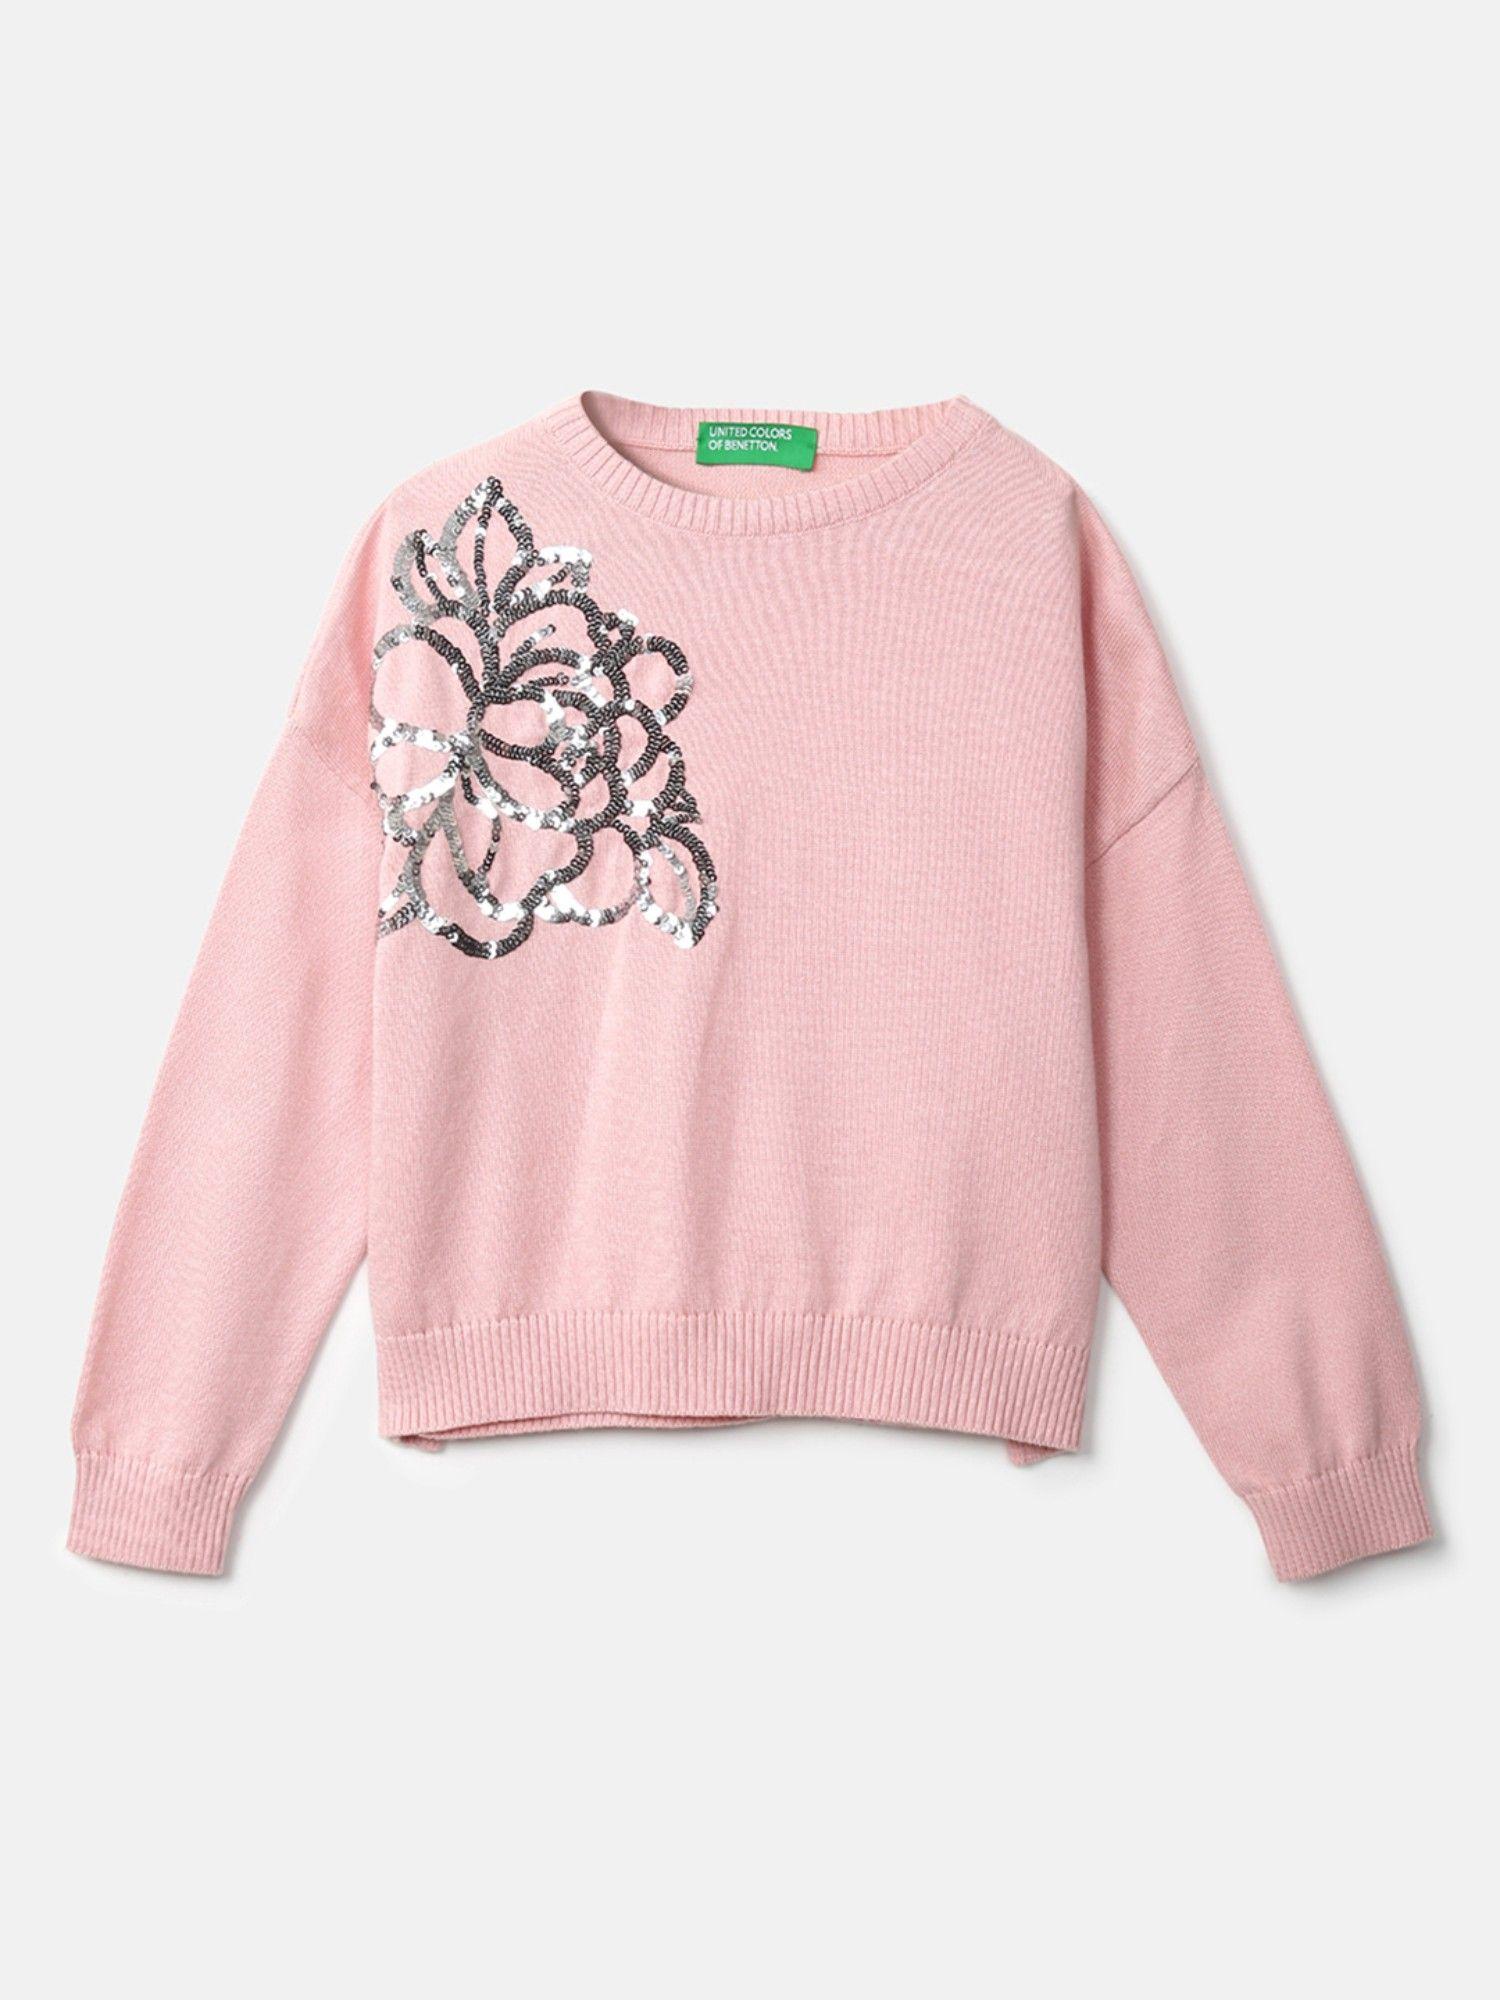 girls pink long sleeve sequined sweater